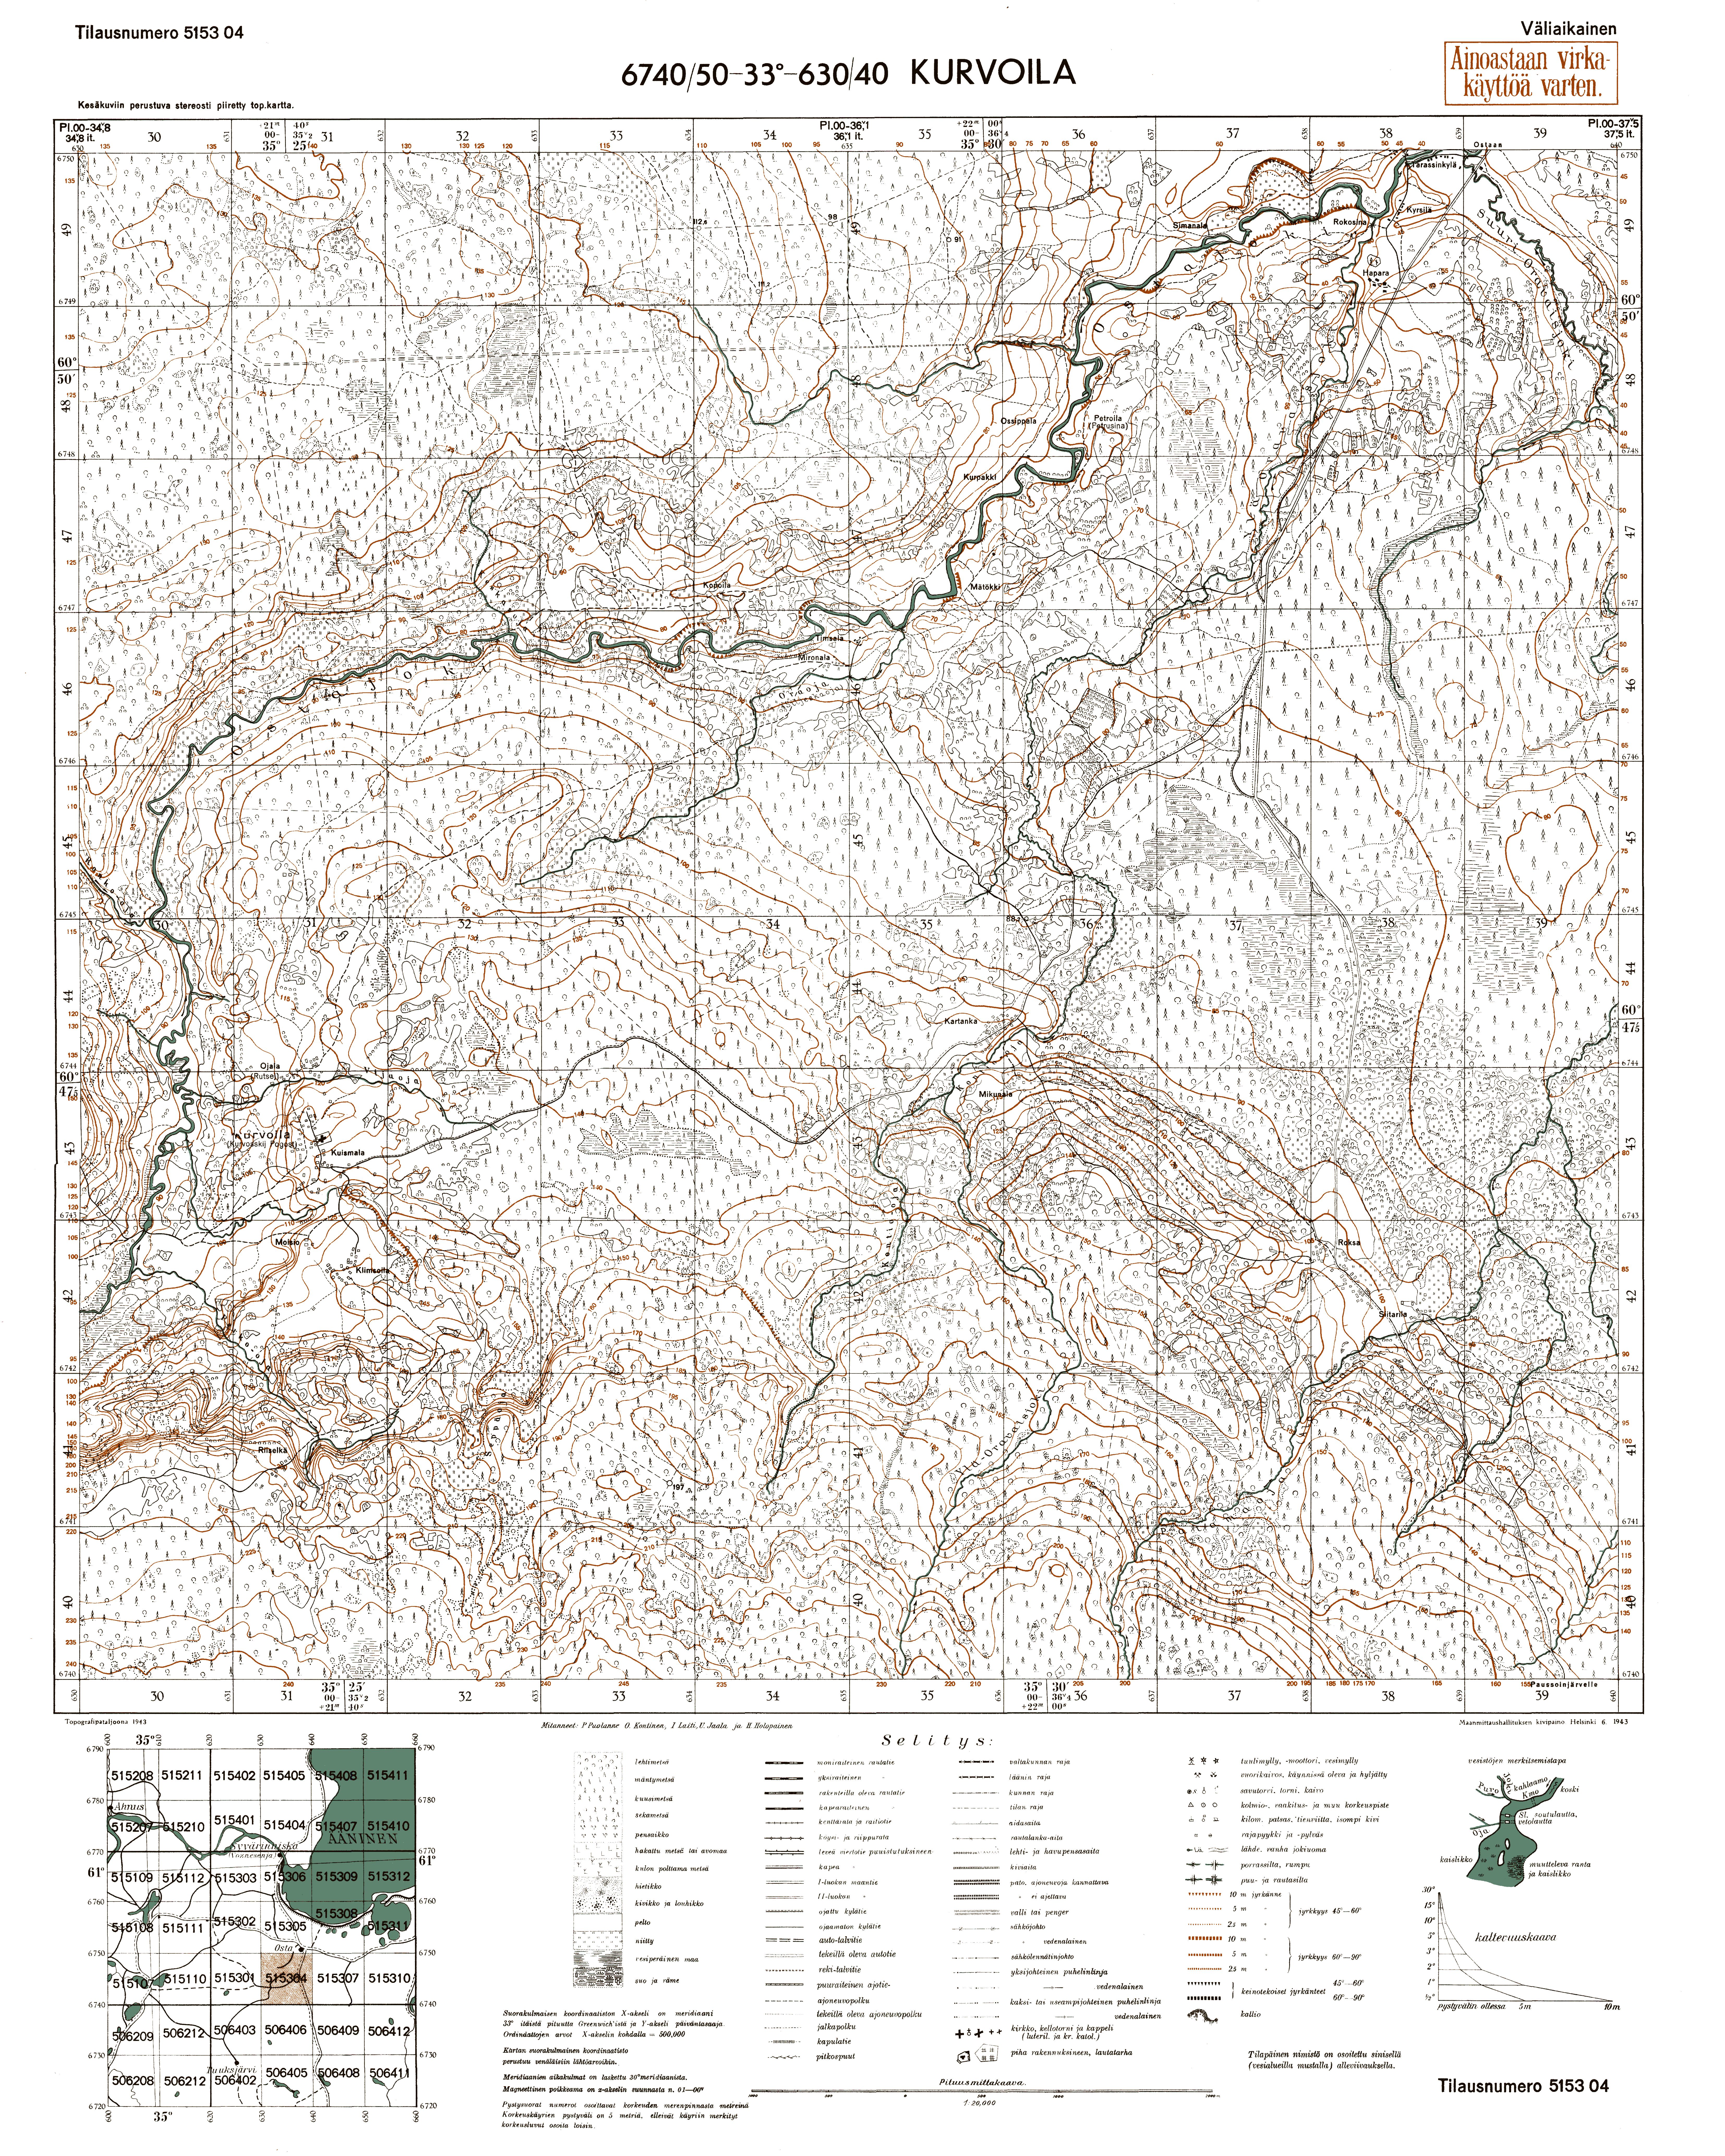 Kurvošskij Pogost. Kurvoila. Topografikartta 515304. Topographic map from 1943. Use the zooming tool to explore in higher level of detail. Obtain as a quality print or high resolution image